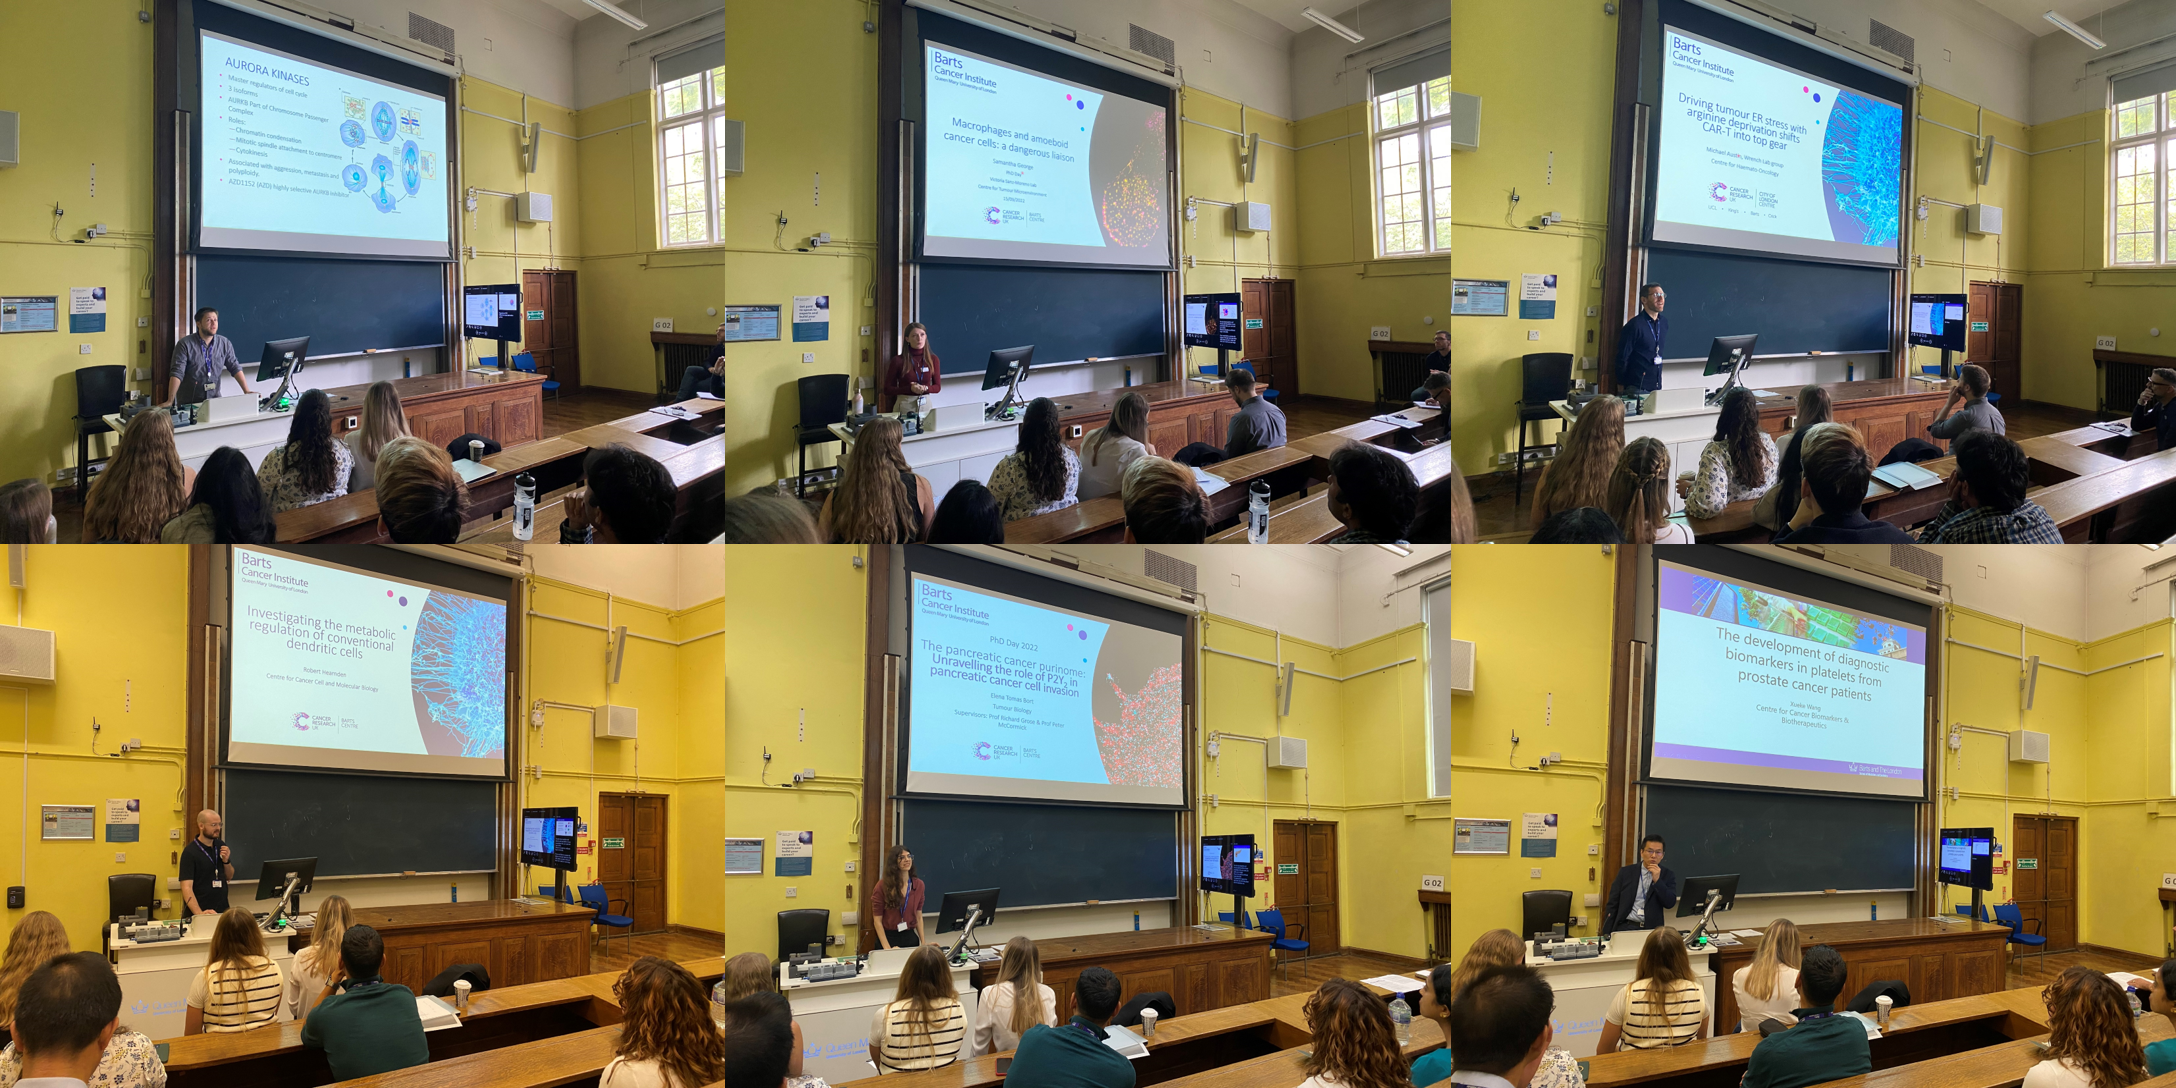 A selection of photos of final year PhD students presenting 10-minute presentions. Students are standing at the front of a lecture theatre with their presenatations slides displayed on a big screen.